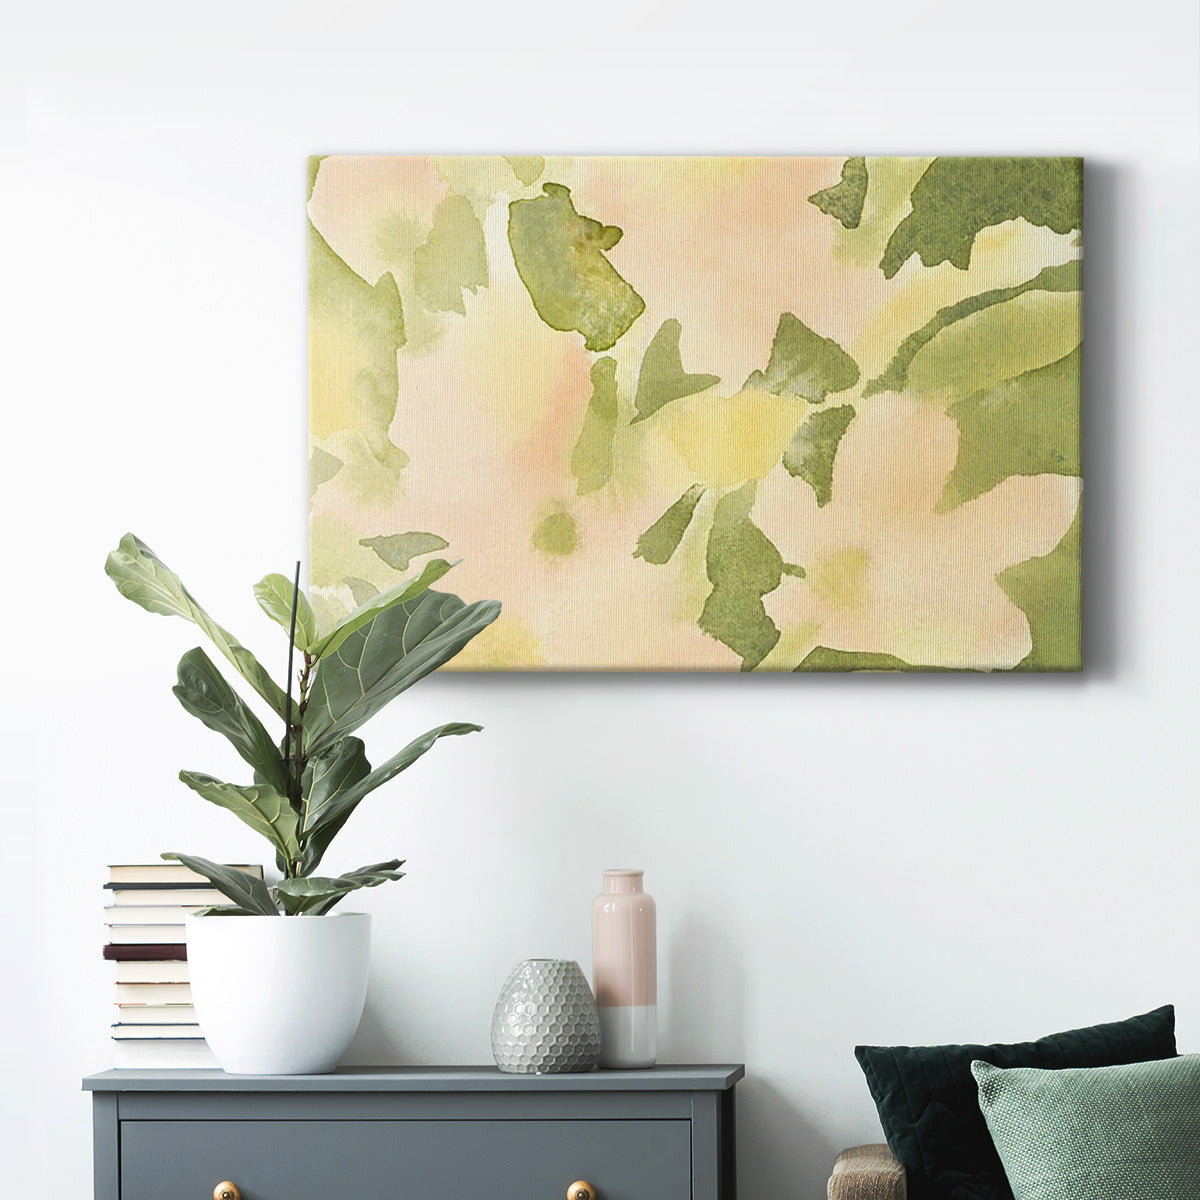 Verdant Floral Abstract I Premium Gallery Wrapped Canvas - Ready to Hang